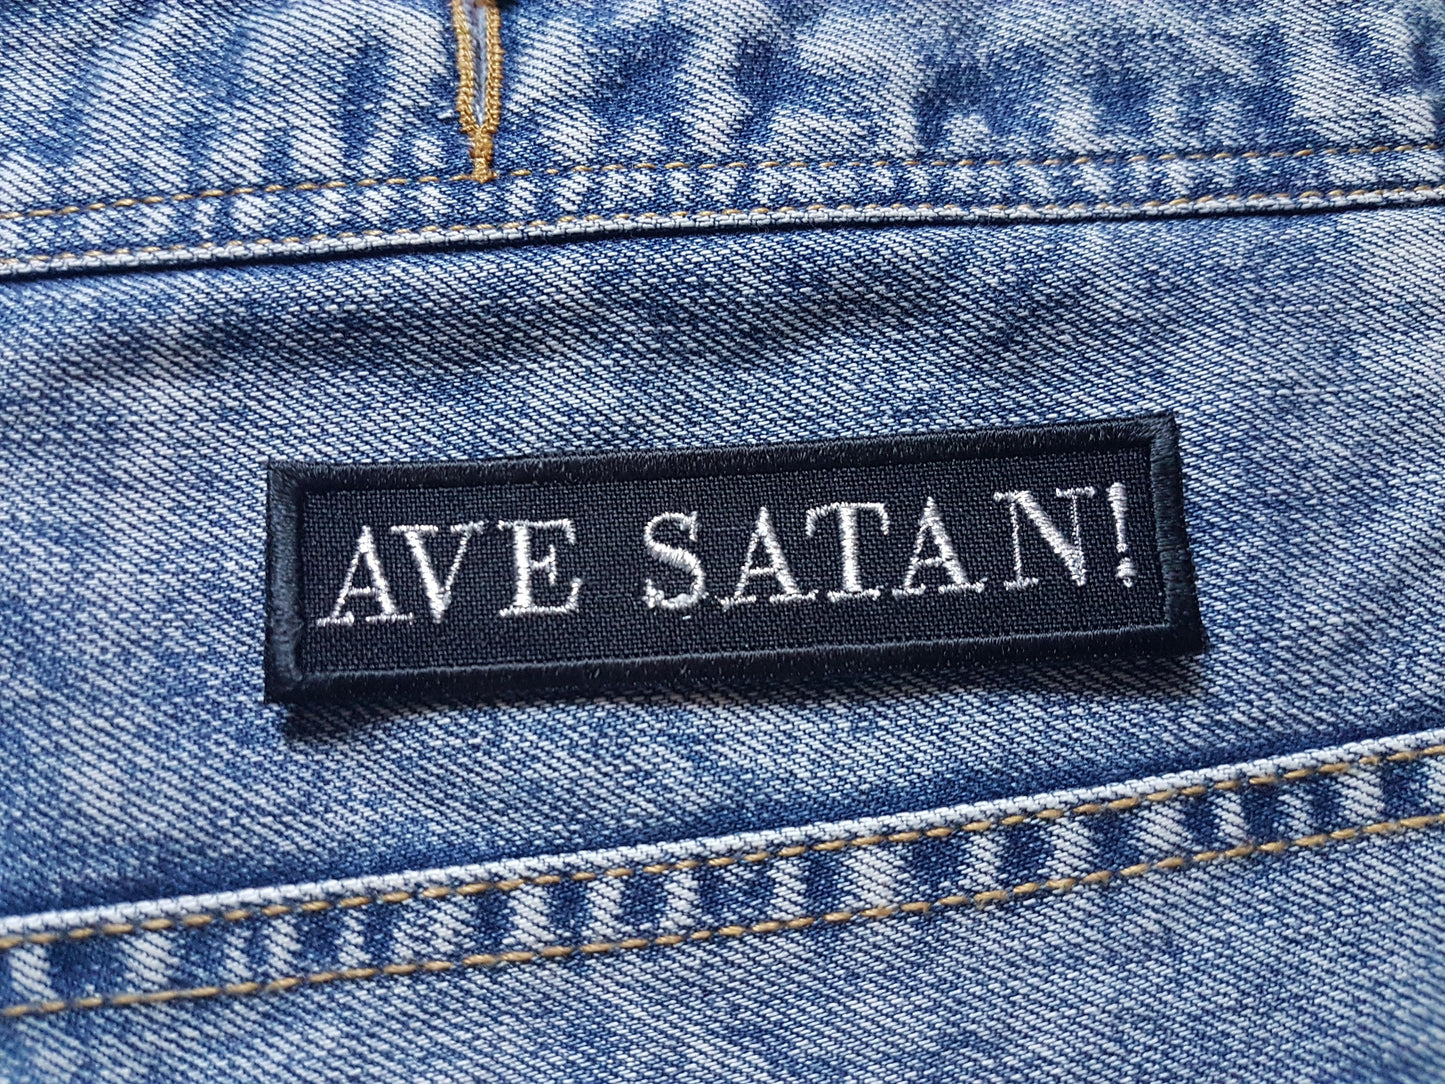 Ave Satan! Embroidered Patch